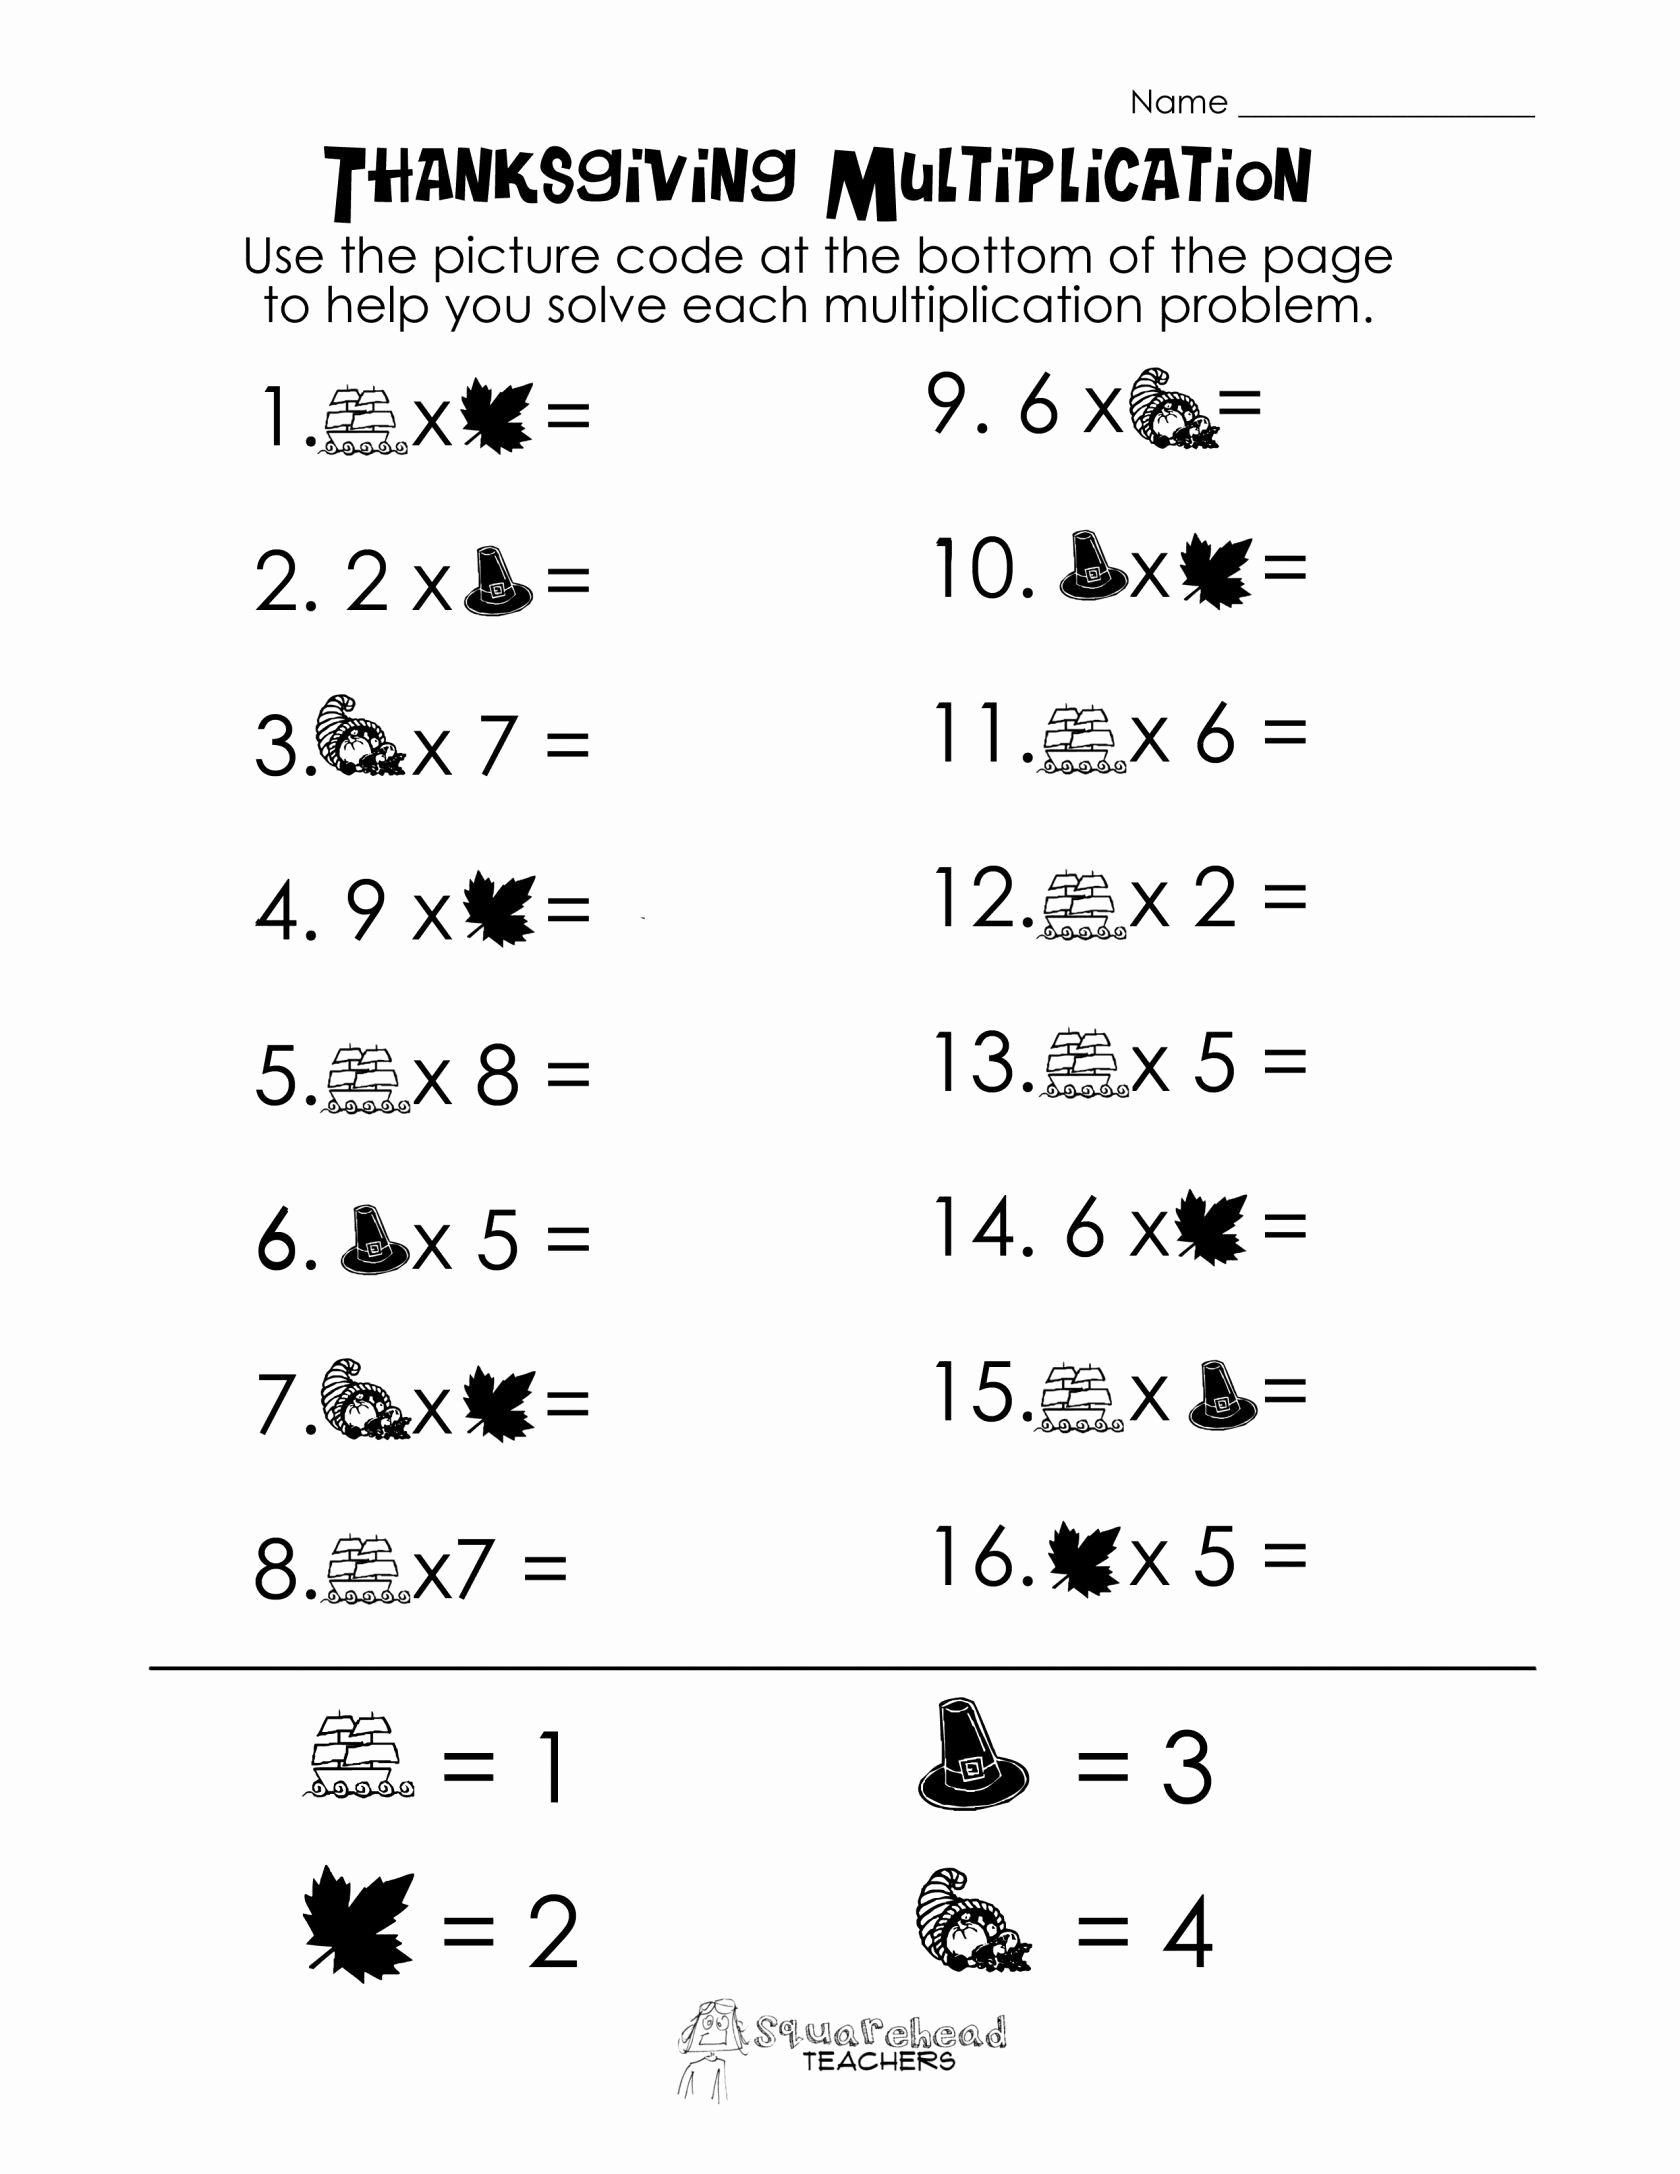 Arithmetic Sequences Worksheet Answers Lovely Arithmetic Sequences Worksheet 1 Answer Key